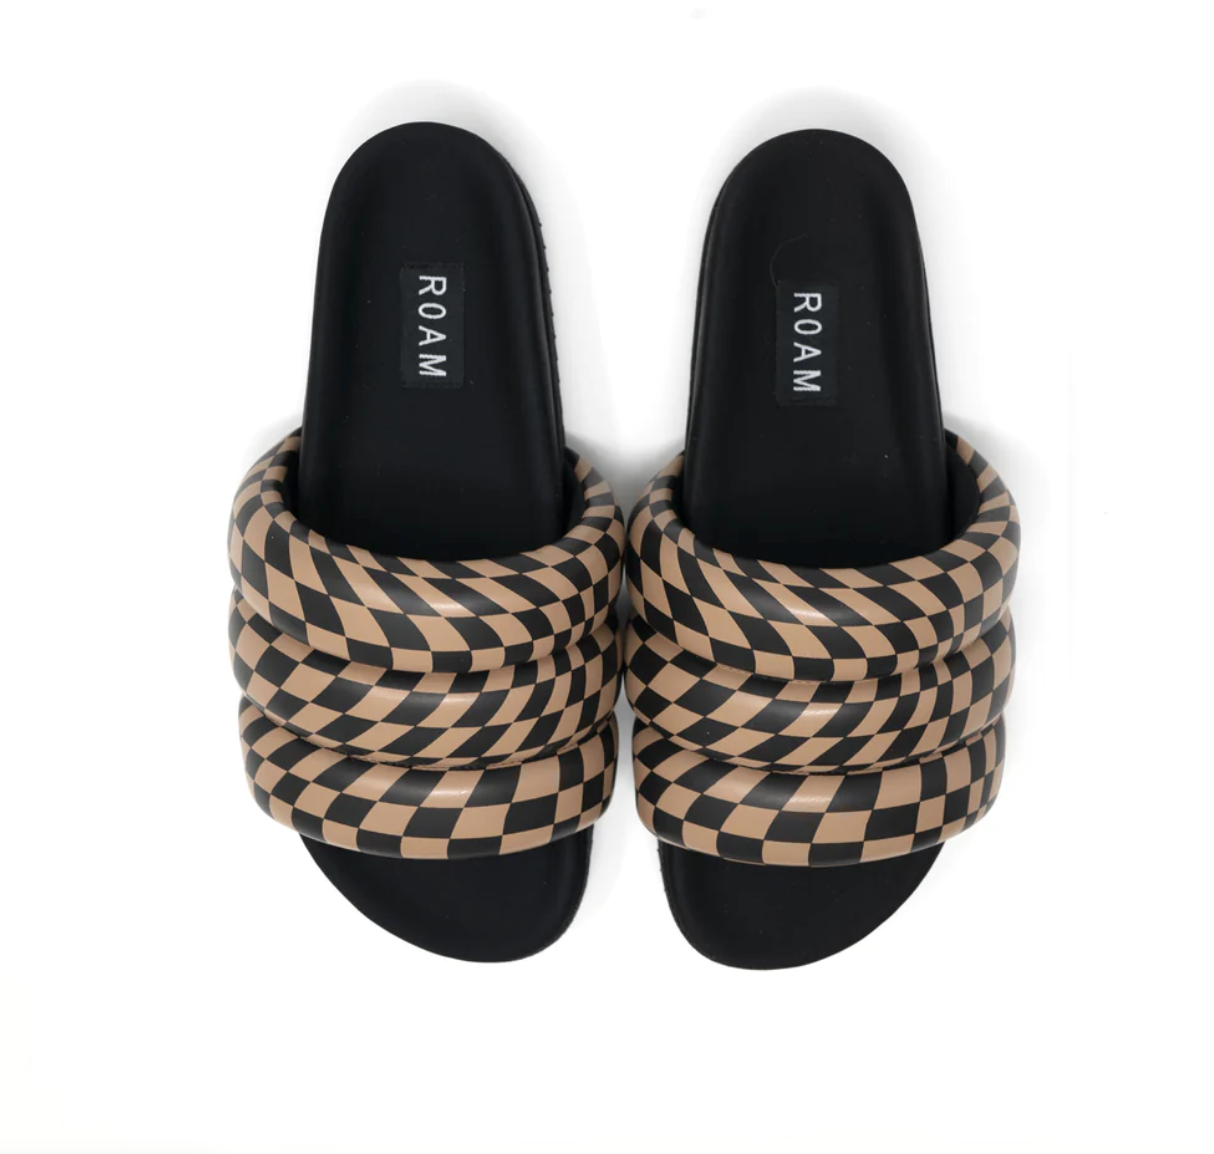 A pair of ROAM CHECKER WAVE PUFFY SLIDERS slide sandals with thick, padded straps featuring a black and tan checkerboard pattern, displayed against a white background. Brand name &quot;Roam&quot; visibly featured on the insoles, inspired by the laid-back bungalow style of Scottsdale, Arizona.